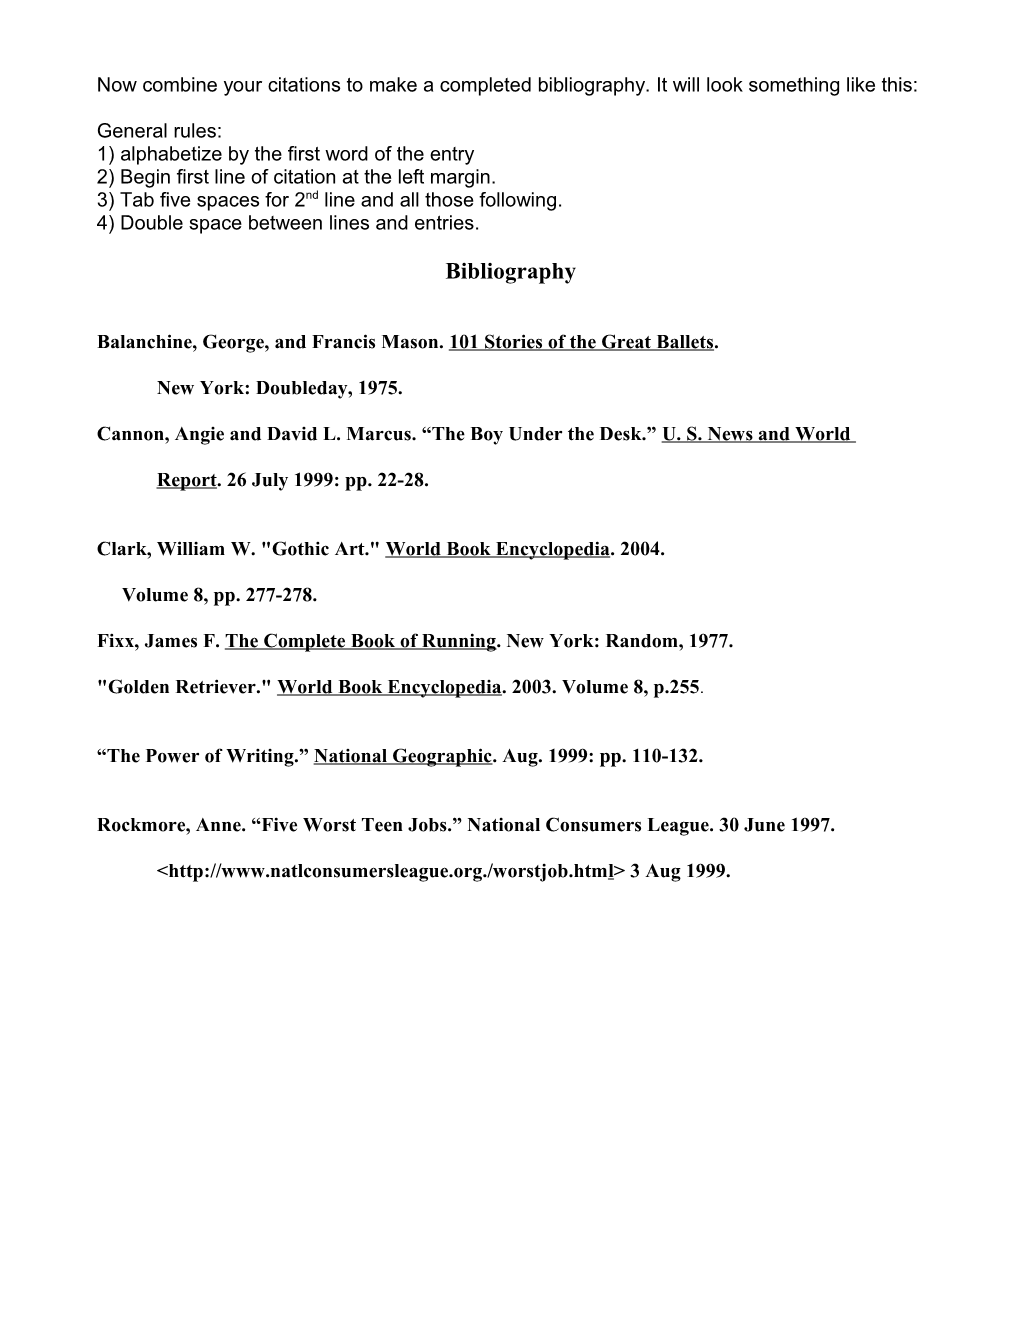 Examples of Citations for a Bibliography